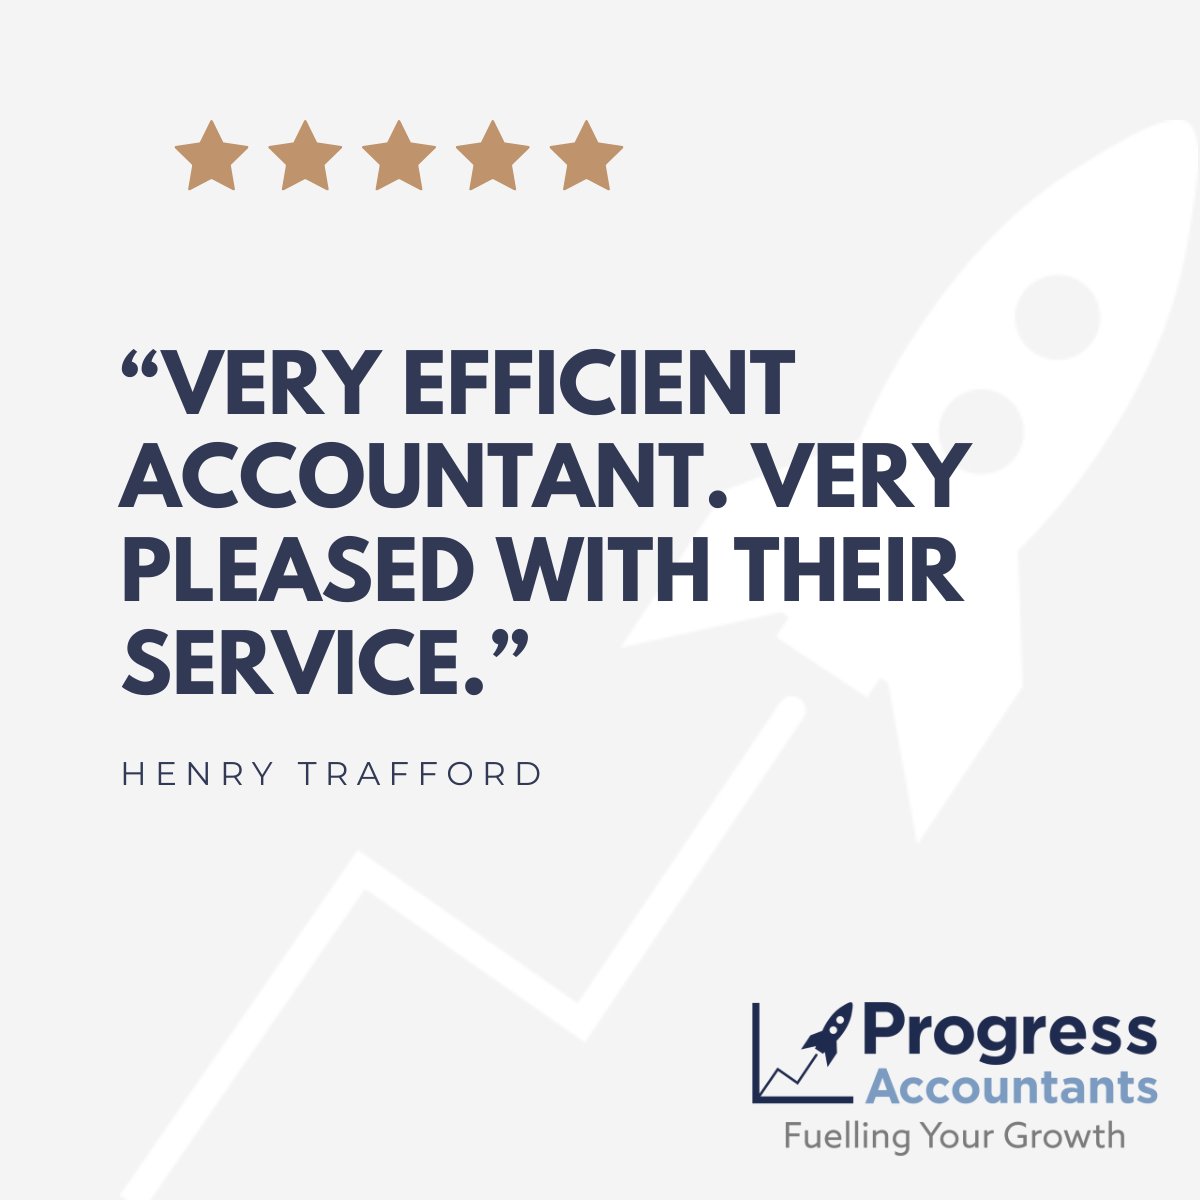 Always good to hear client feedback to find out ways we can improve.